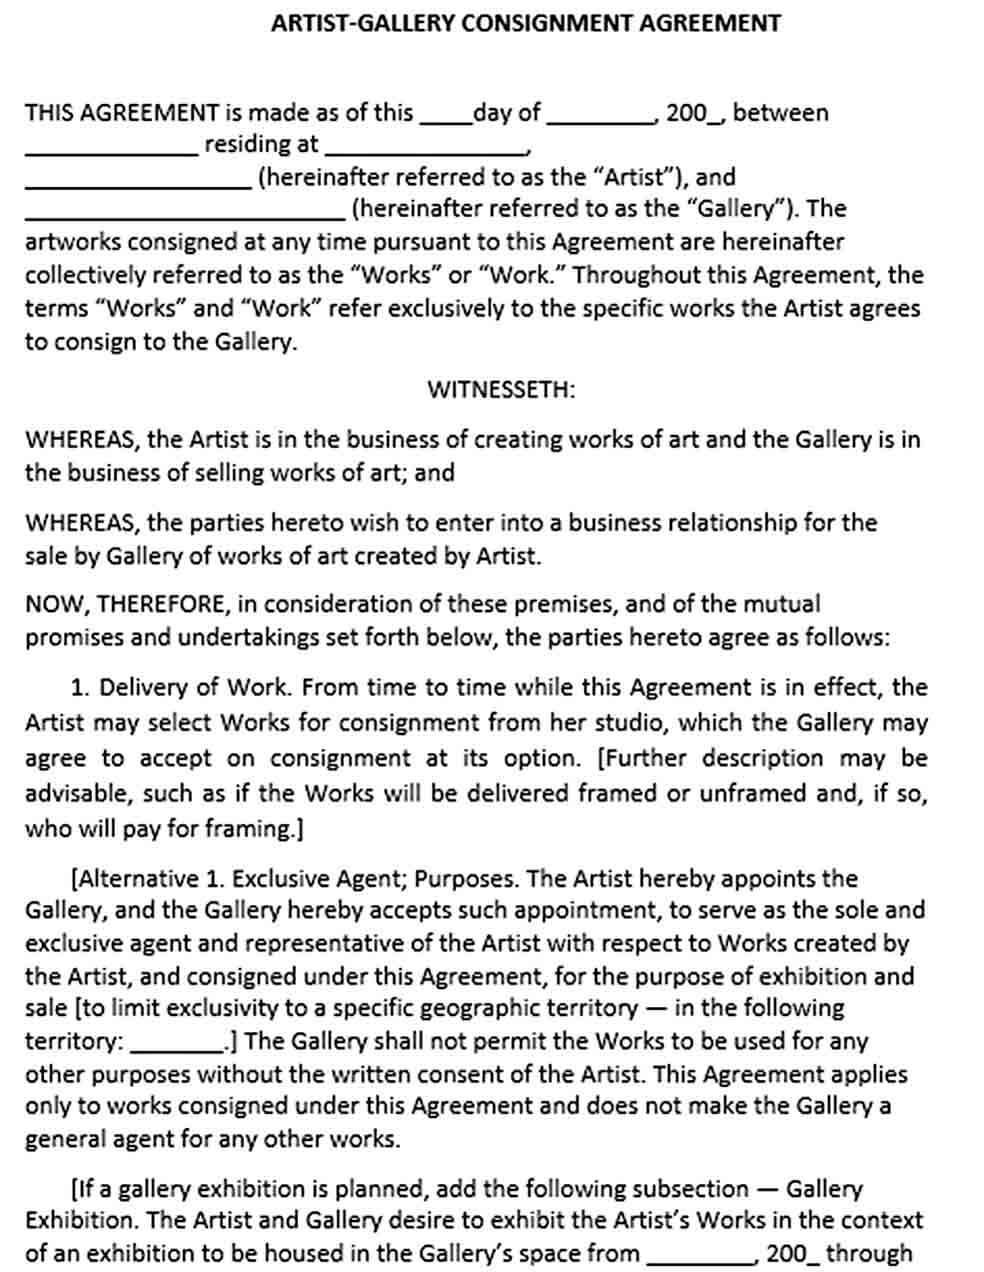 Sample Artist Gallery Consignment Agreement